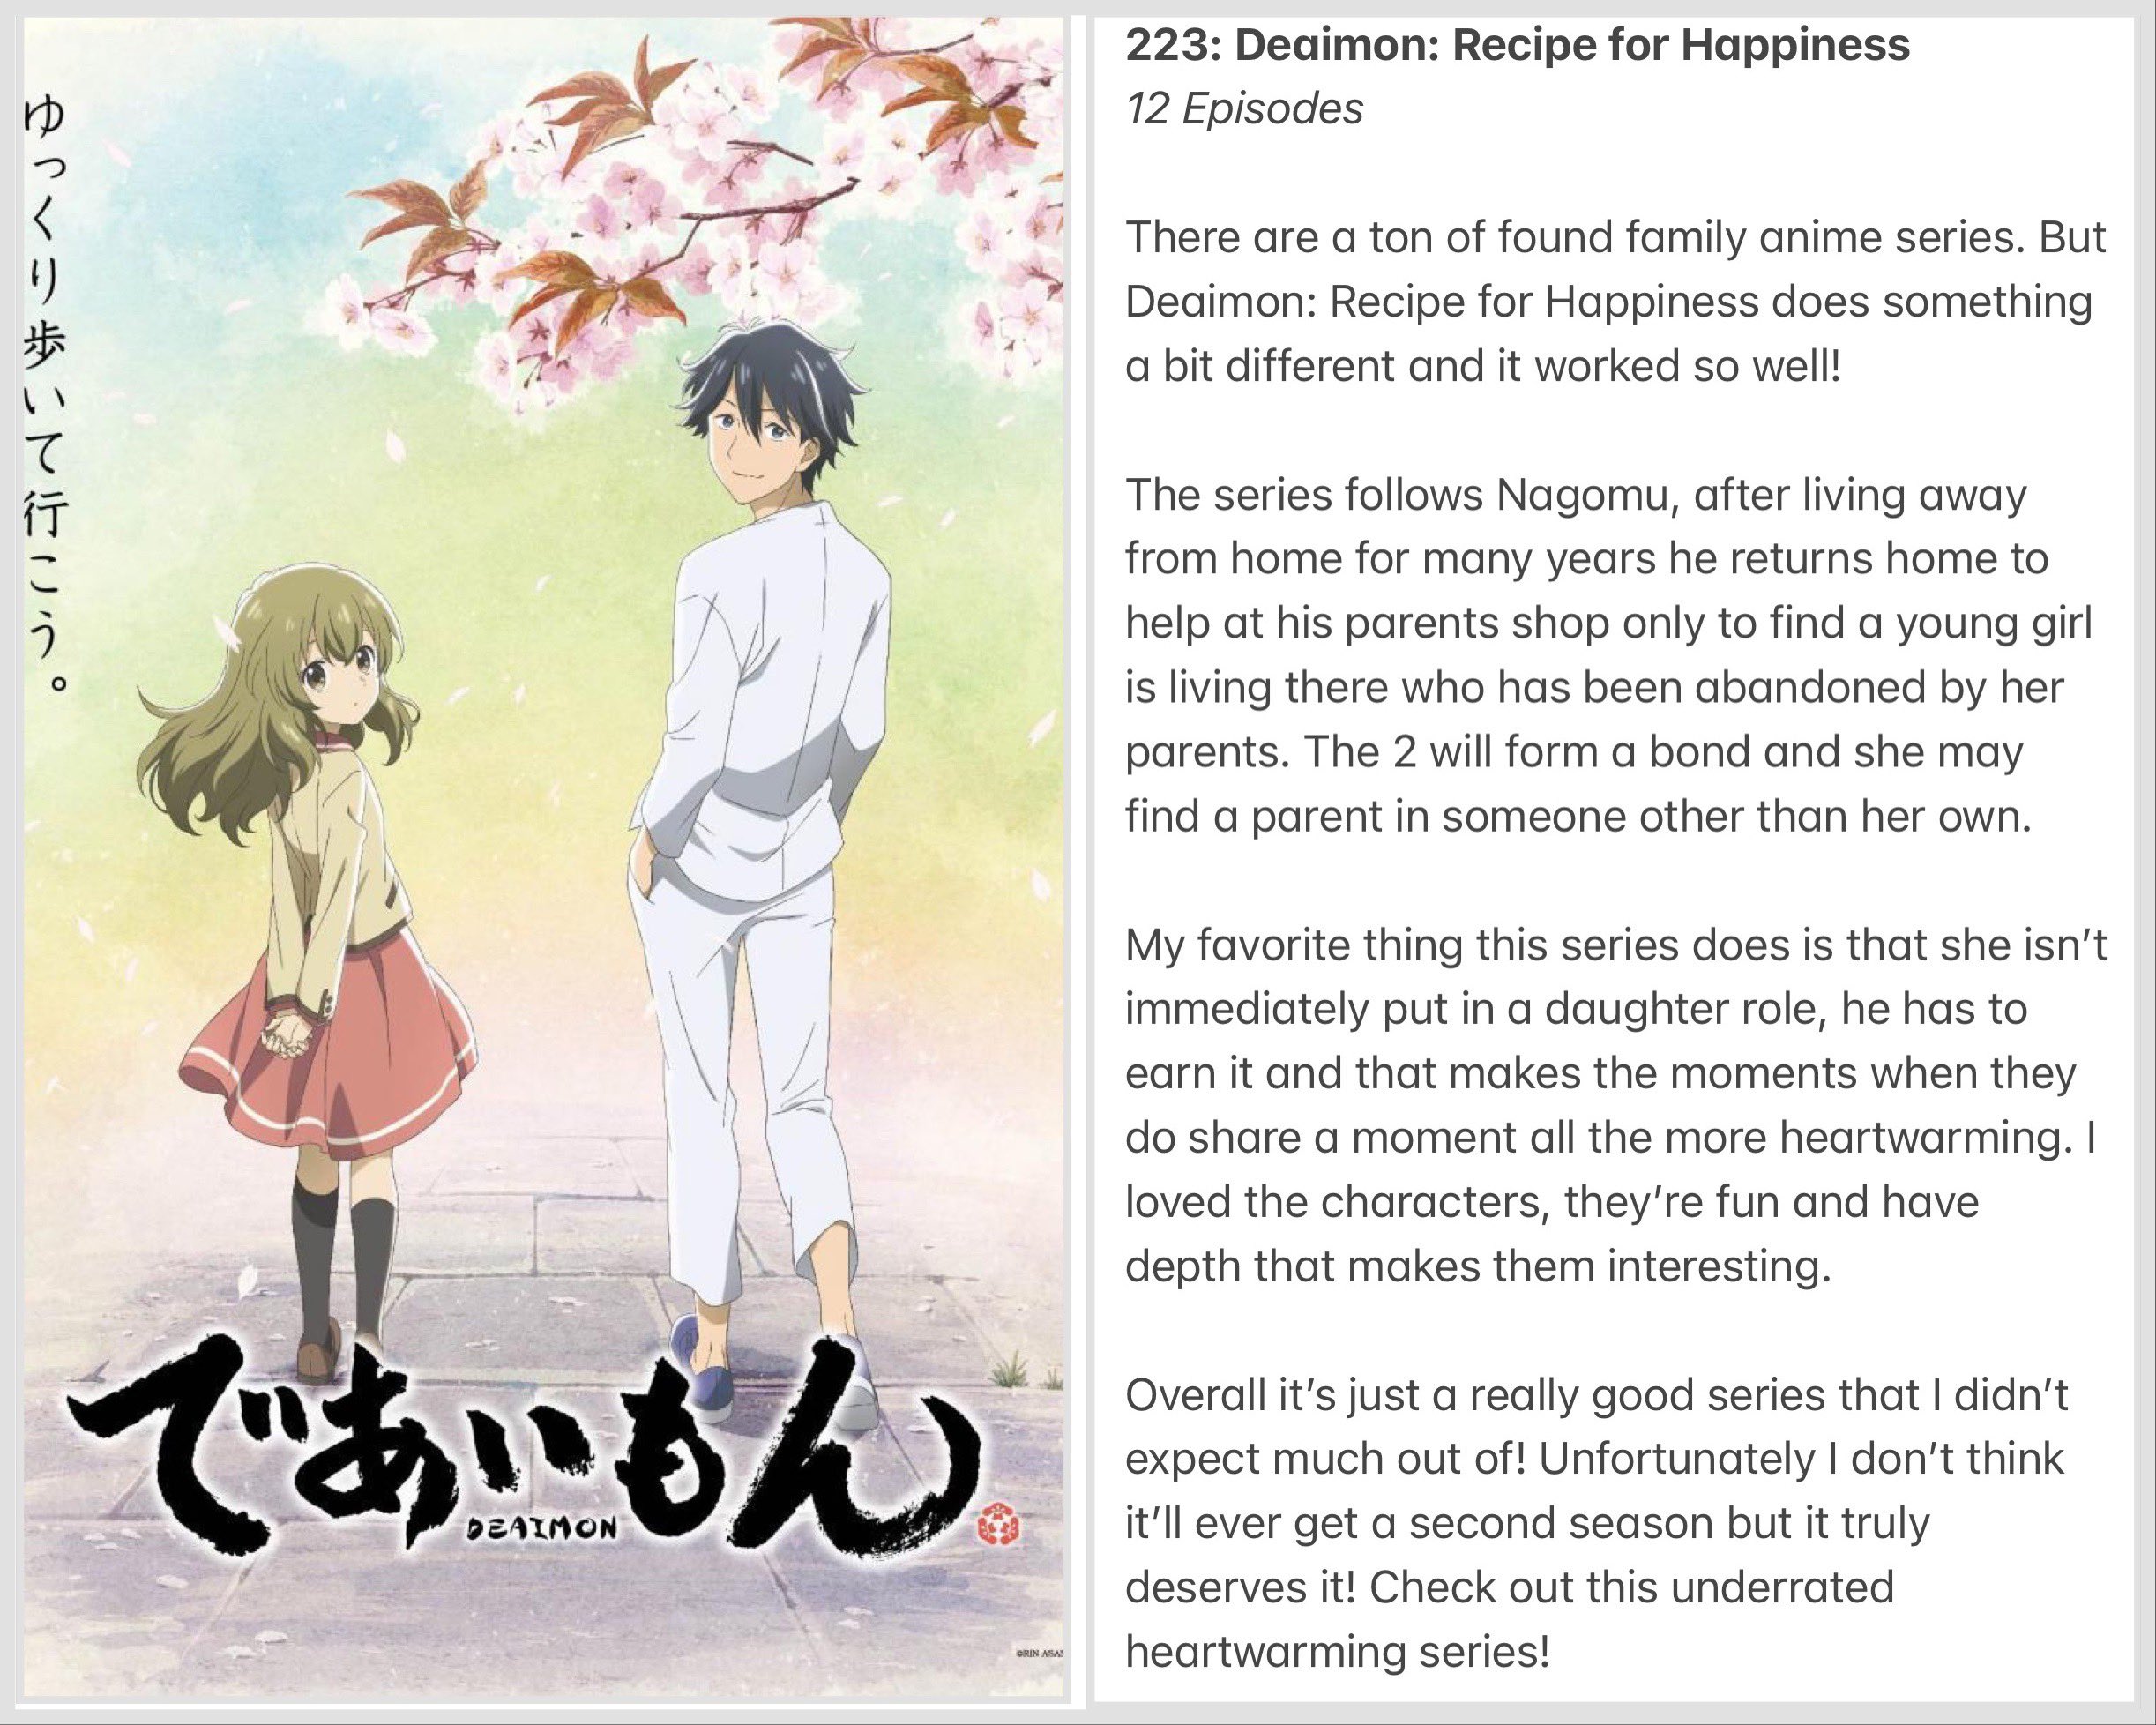 Episode 5 - Deaimon: Recipe for Happiness - Anime News Network